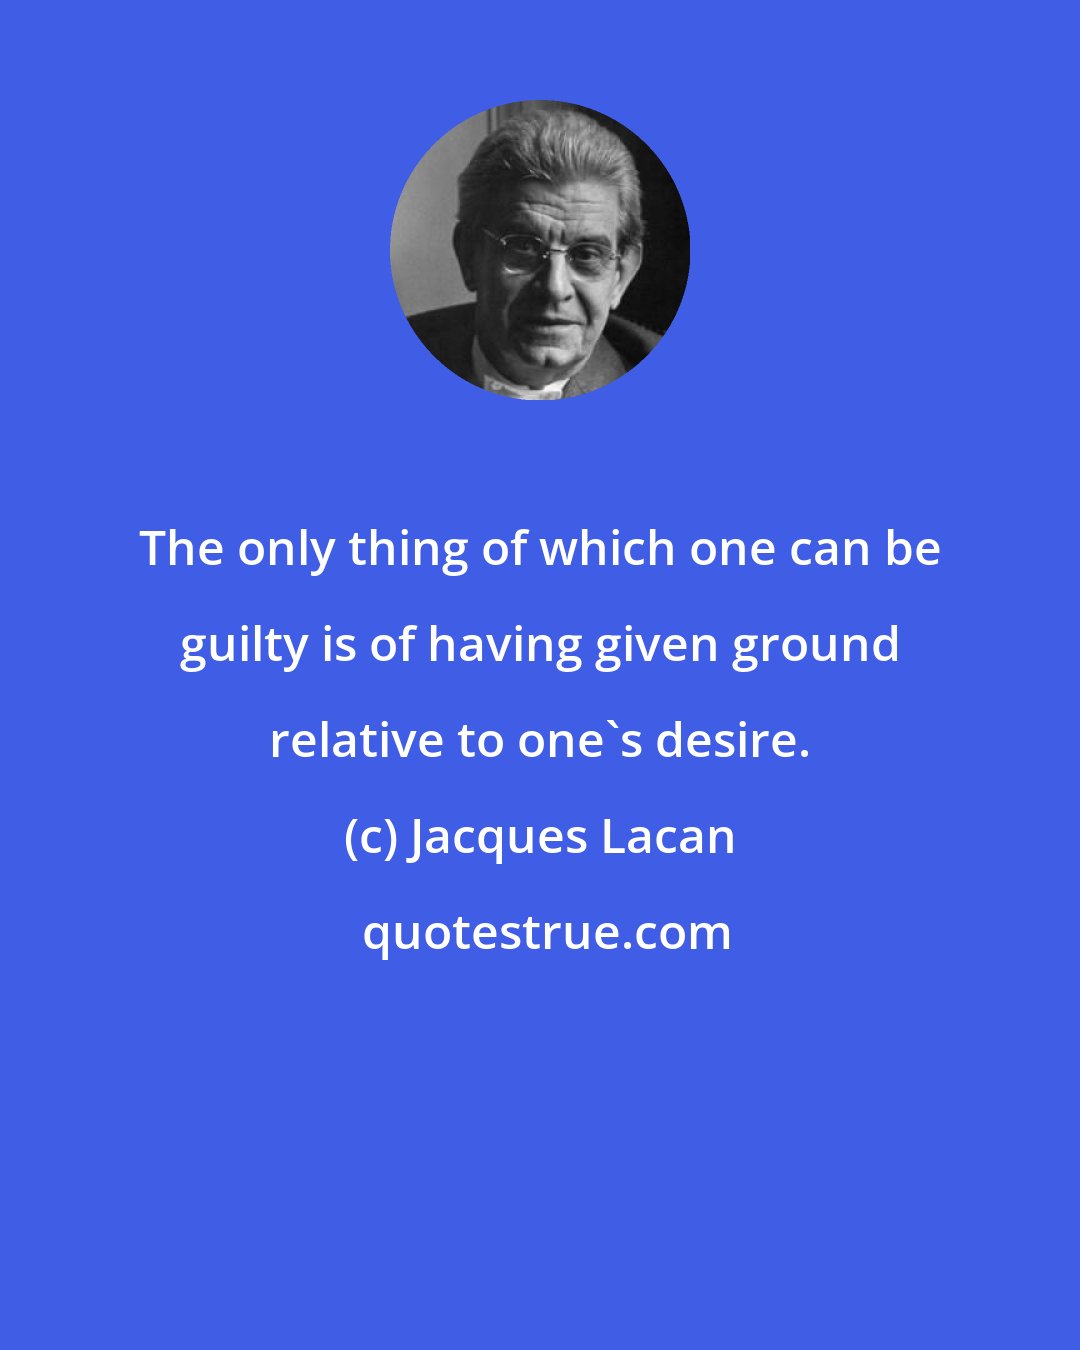 Jacques Lacan: The only thing of which one can be guilty is of having given ground relative to one's desire.